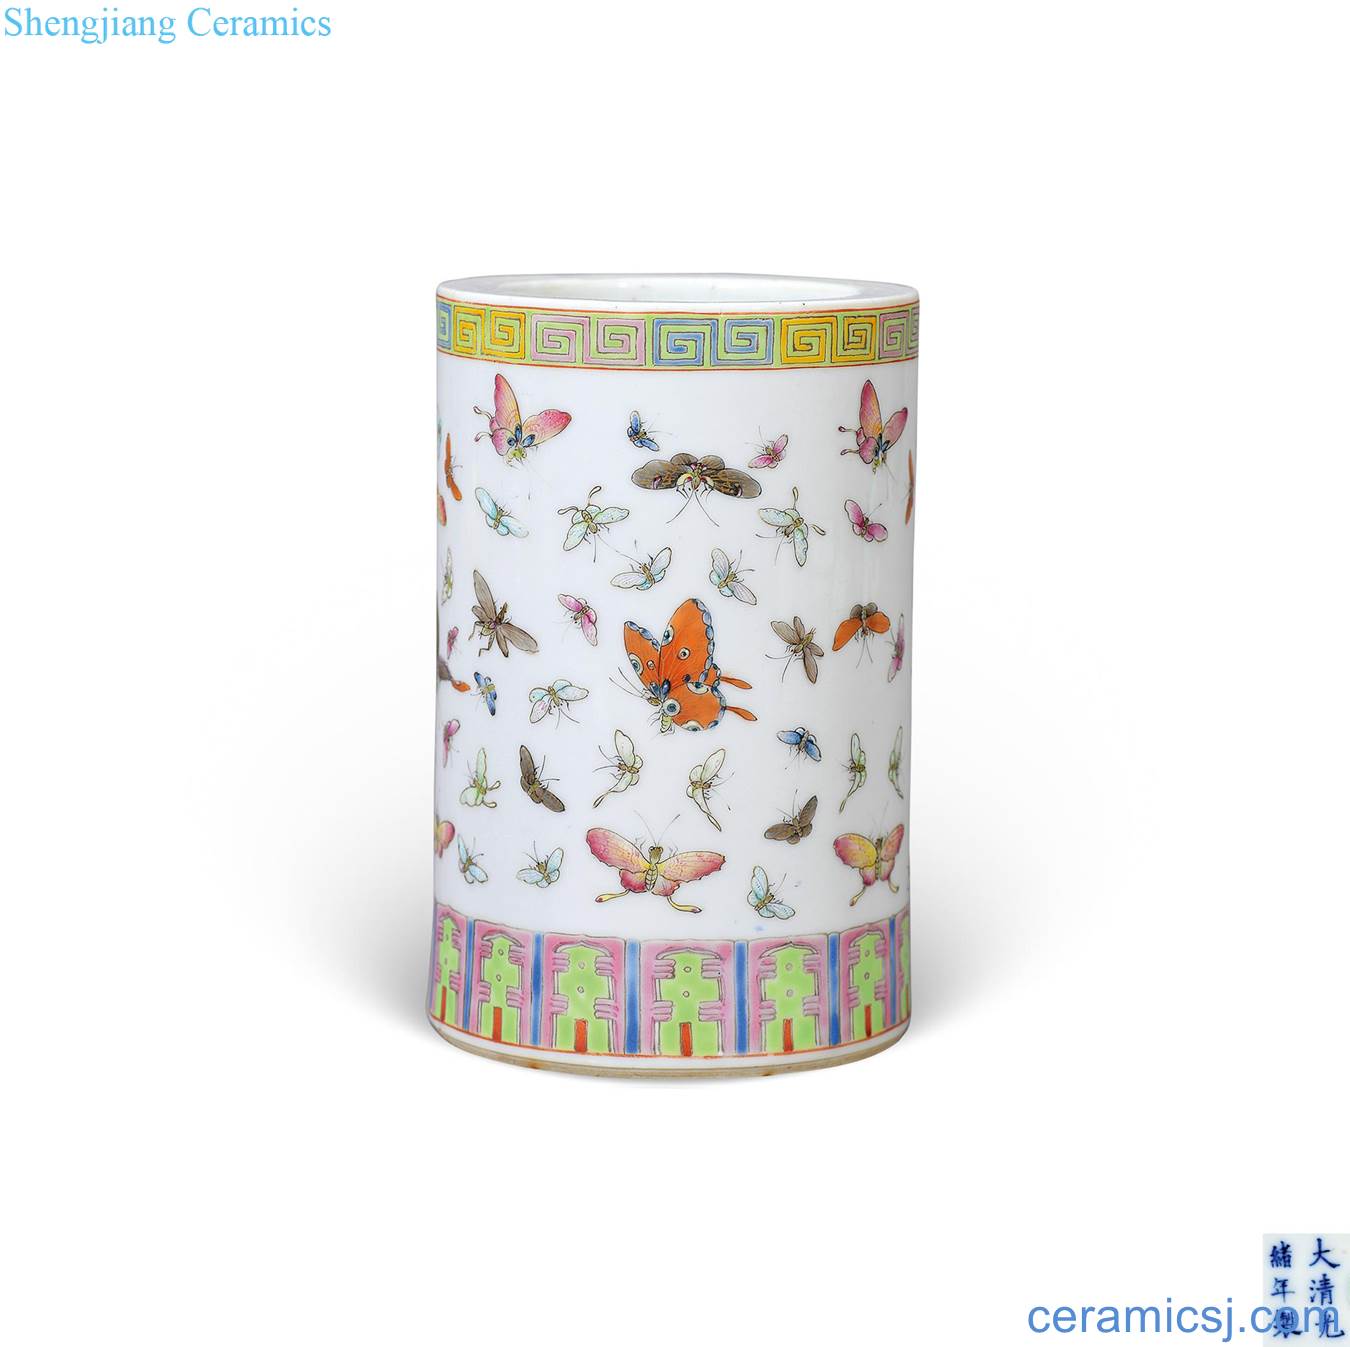 Pastel reign of qing emperor guangxu butterfly pen container